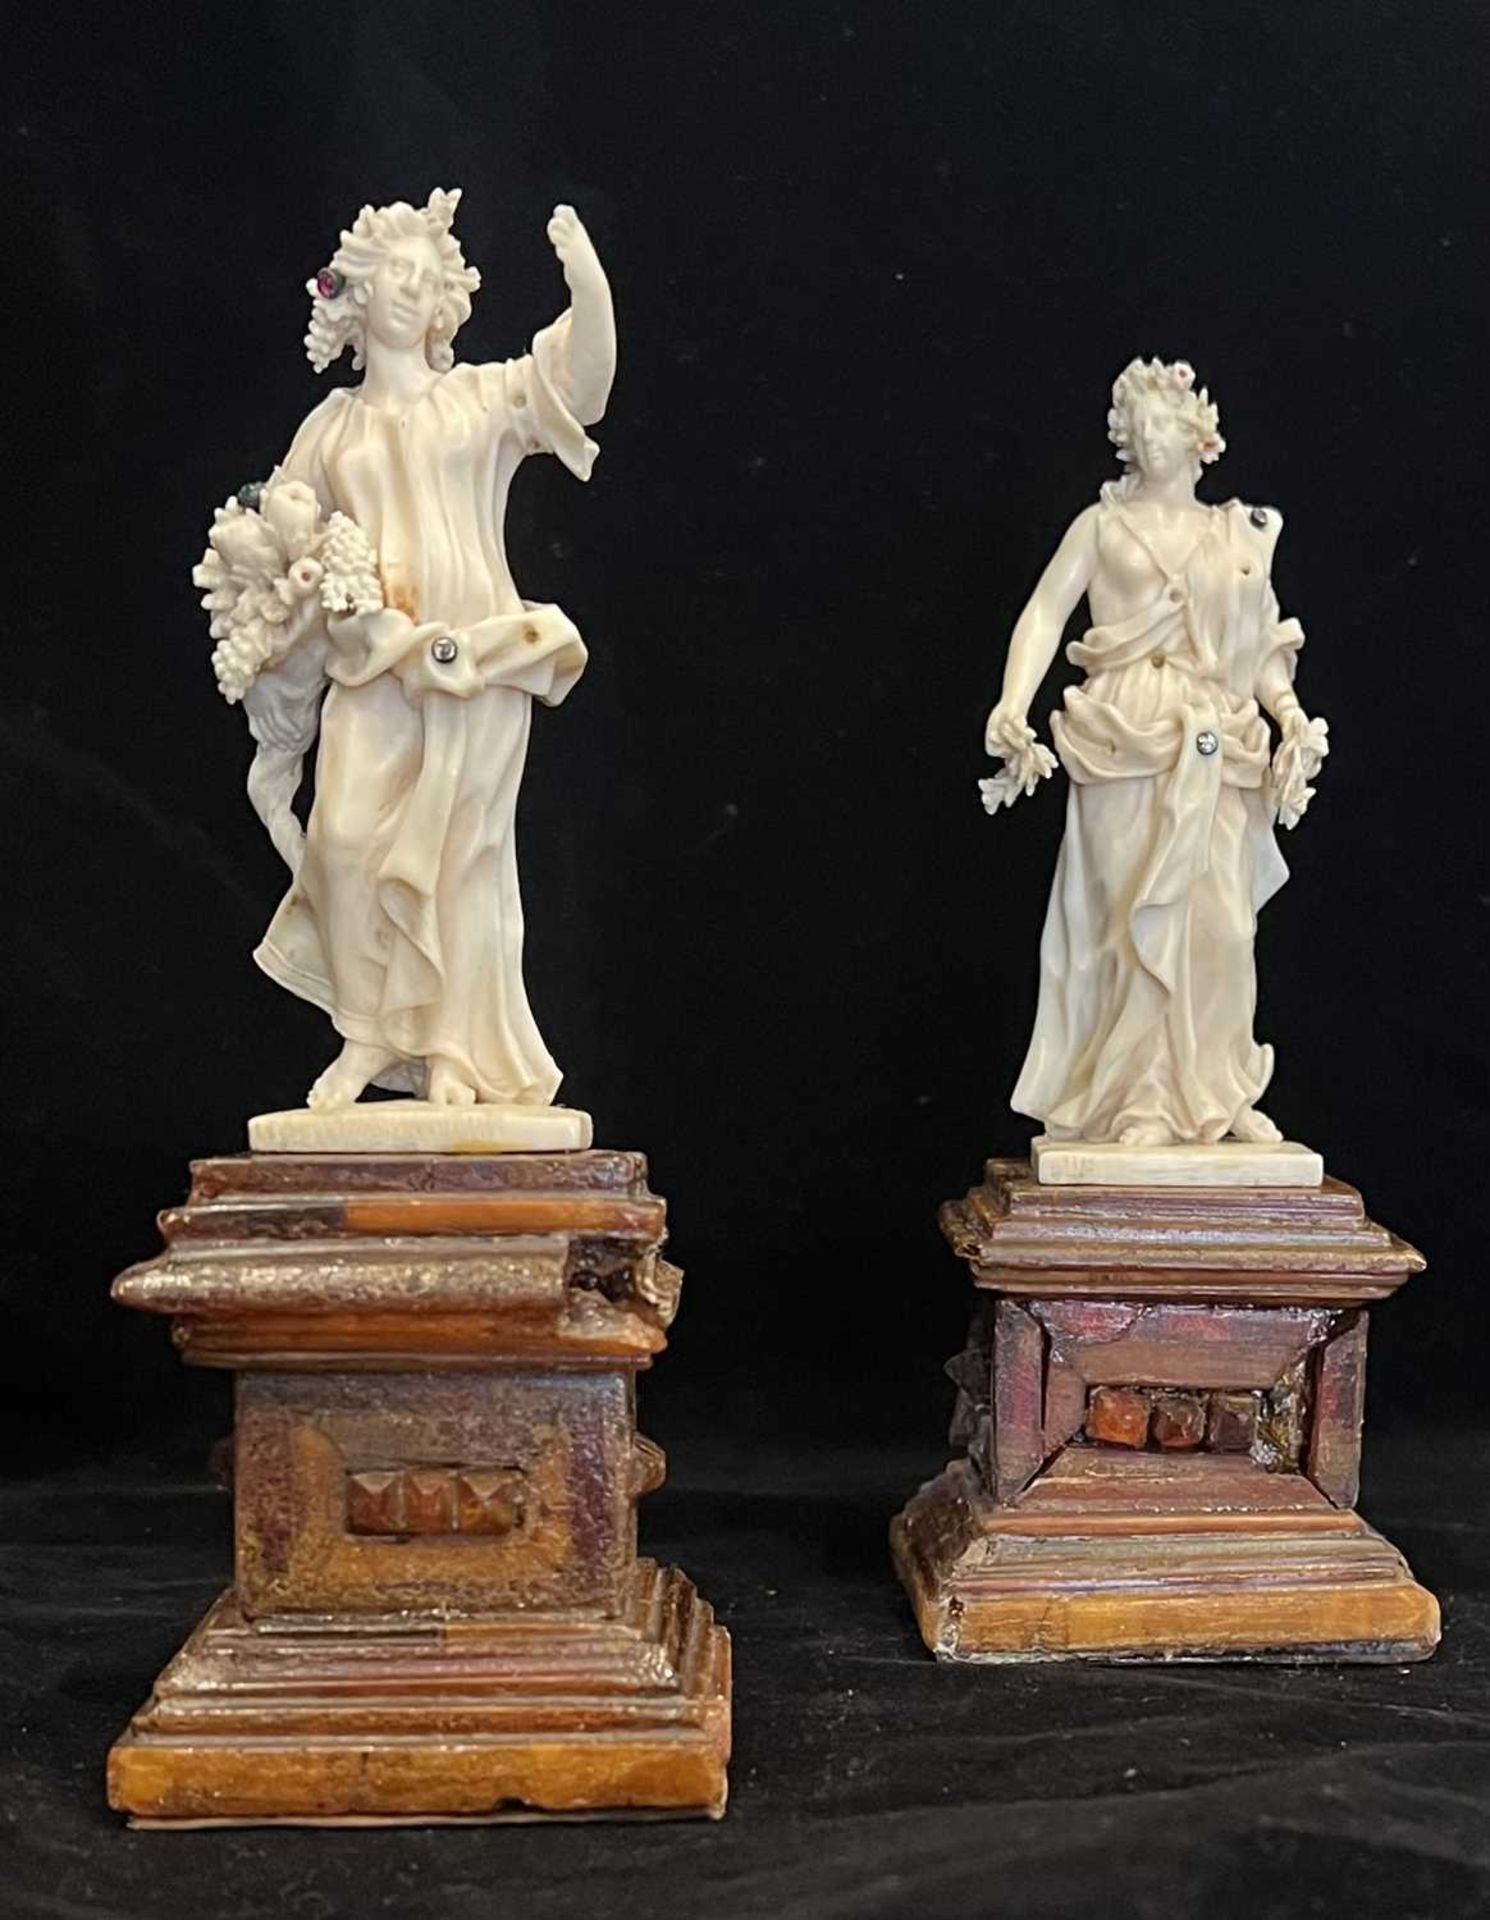 H.R.H PRINCESS MARGARET'S WEDDING GIFT: A PAIR OF 18TH CENTURY IVORY FIGURES OF SPRING AND AUTUMN - Image 2 of 14